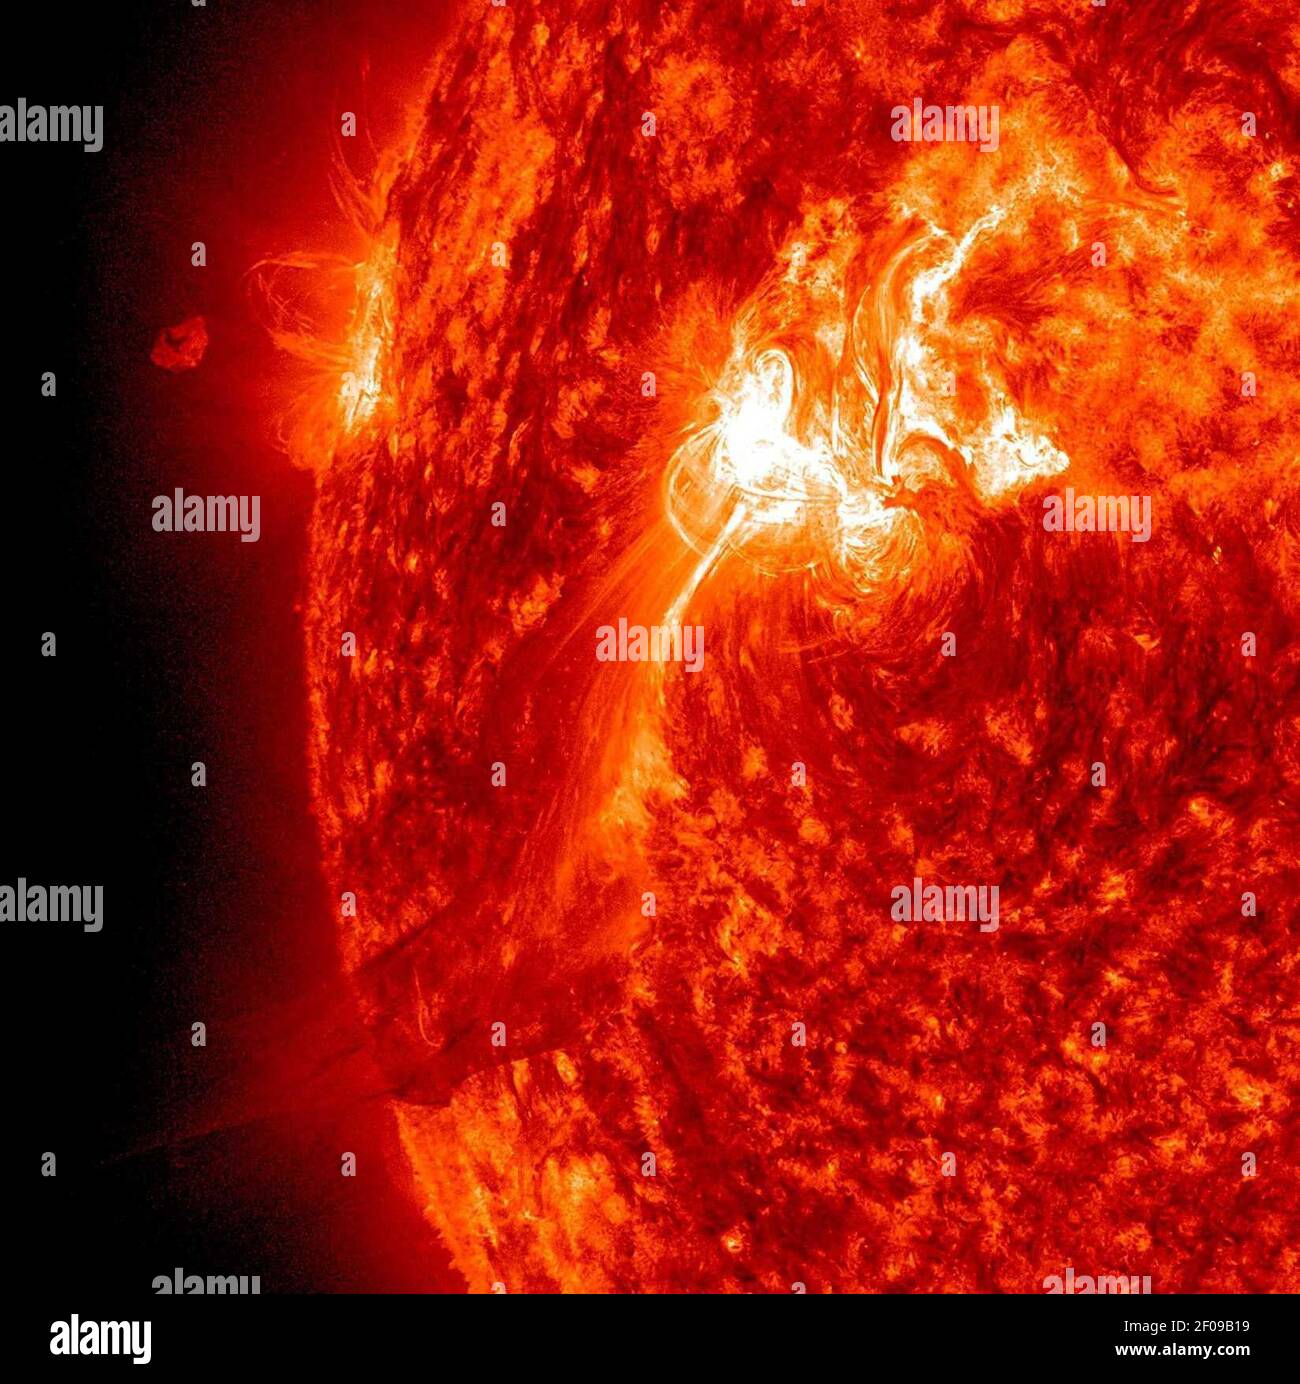 25 September 2011 - The Sun popped off an M-Class (moderate level) flare on Sept. 25, 2011 that sent a plume of plasma out above the Sun, but a good portion of it appeared to fall back towards the active region that launched it. TWith an image every minute, every nuance of graceful motion can be observed in wonderful detail. The bright flash shows the flare itself erupting. Since this event, this active region has been the source of several large flares and many lesser ones that have caused geo-effective storms on Earth as it has rotated around towards facing us. Photo Credit: NASA/SDO/Sipa Pr Stock Photo